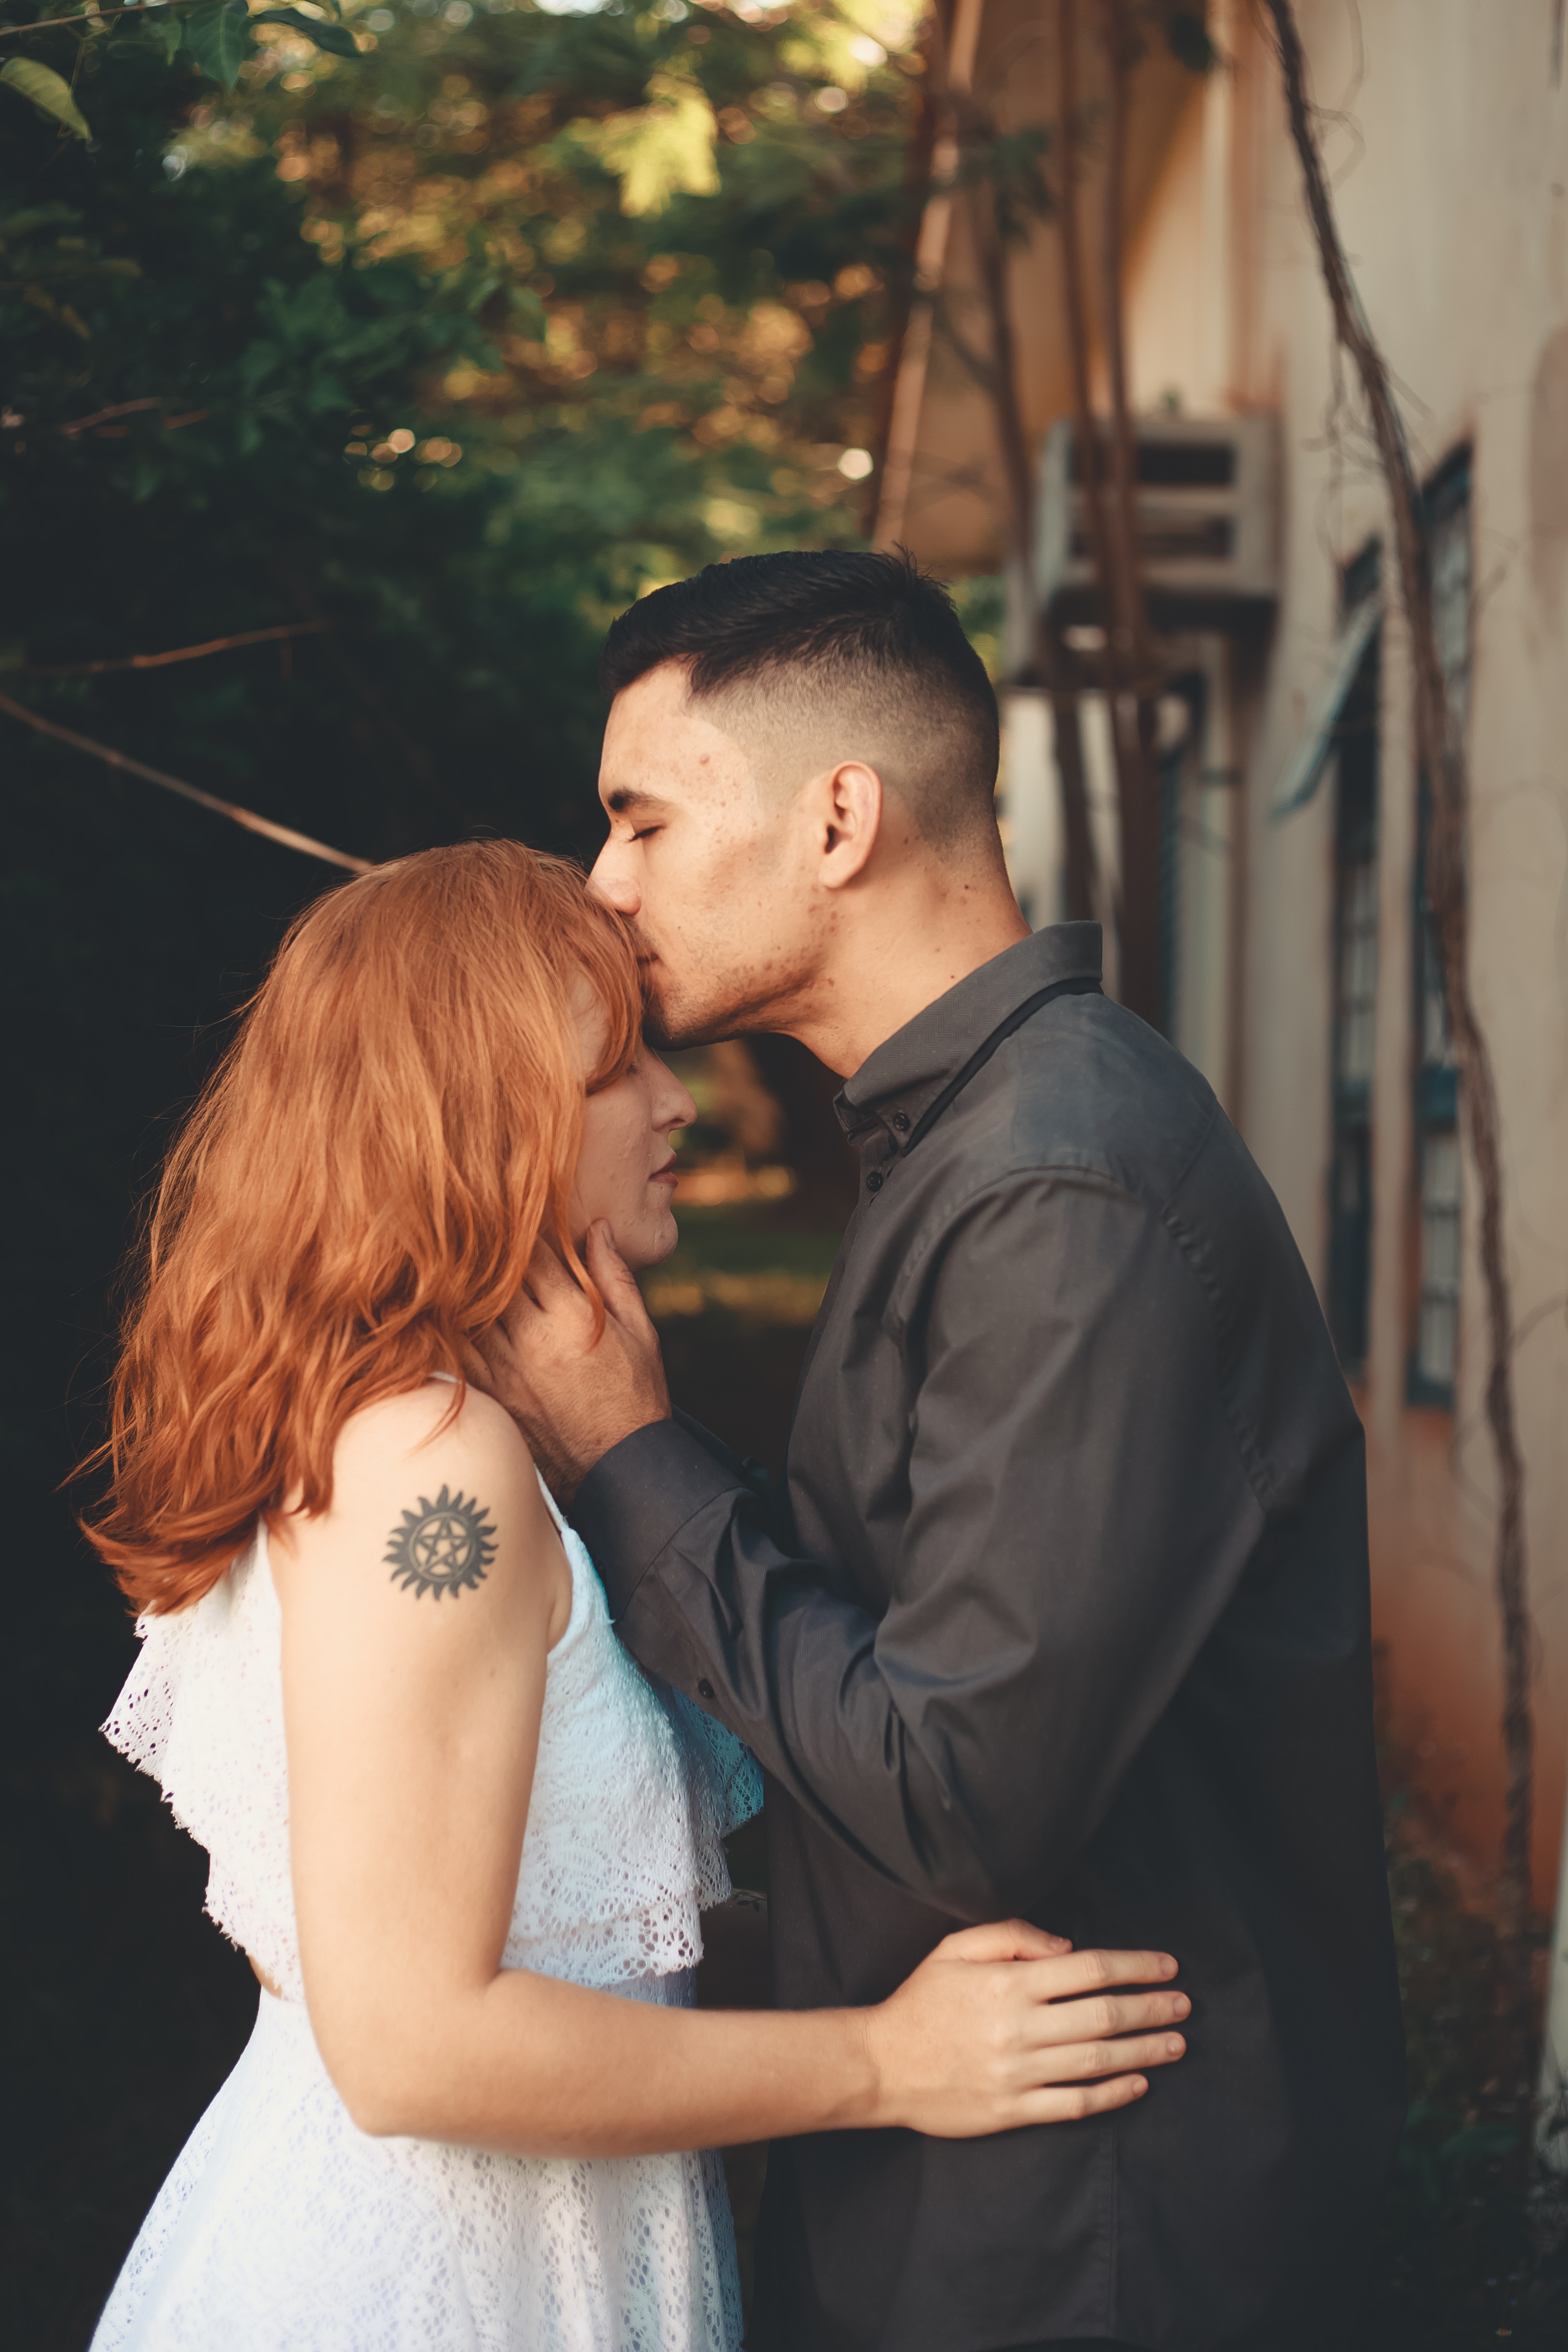 A man kissing a woman on the forehead. | Source: Pexels